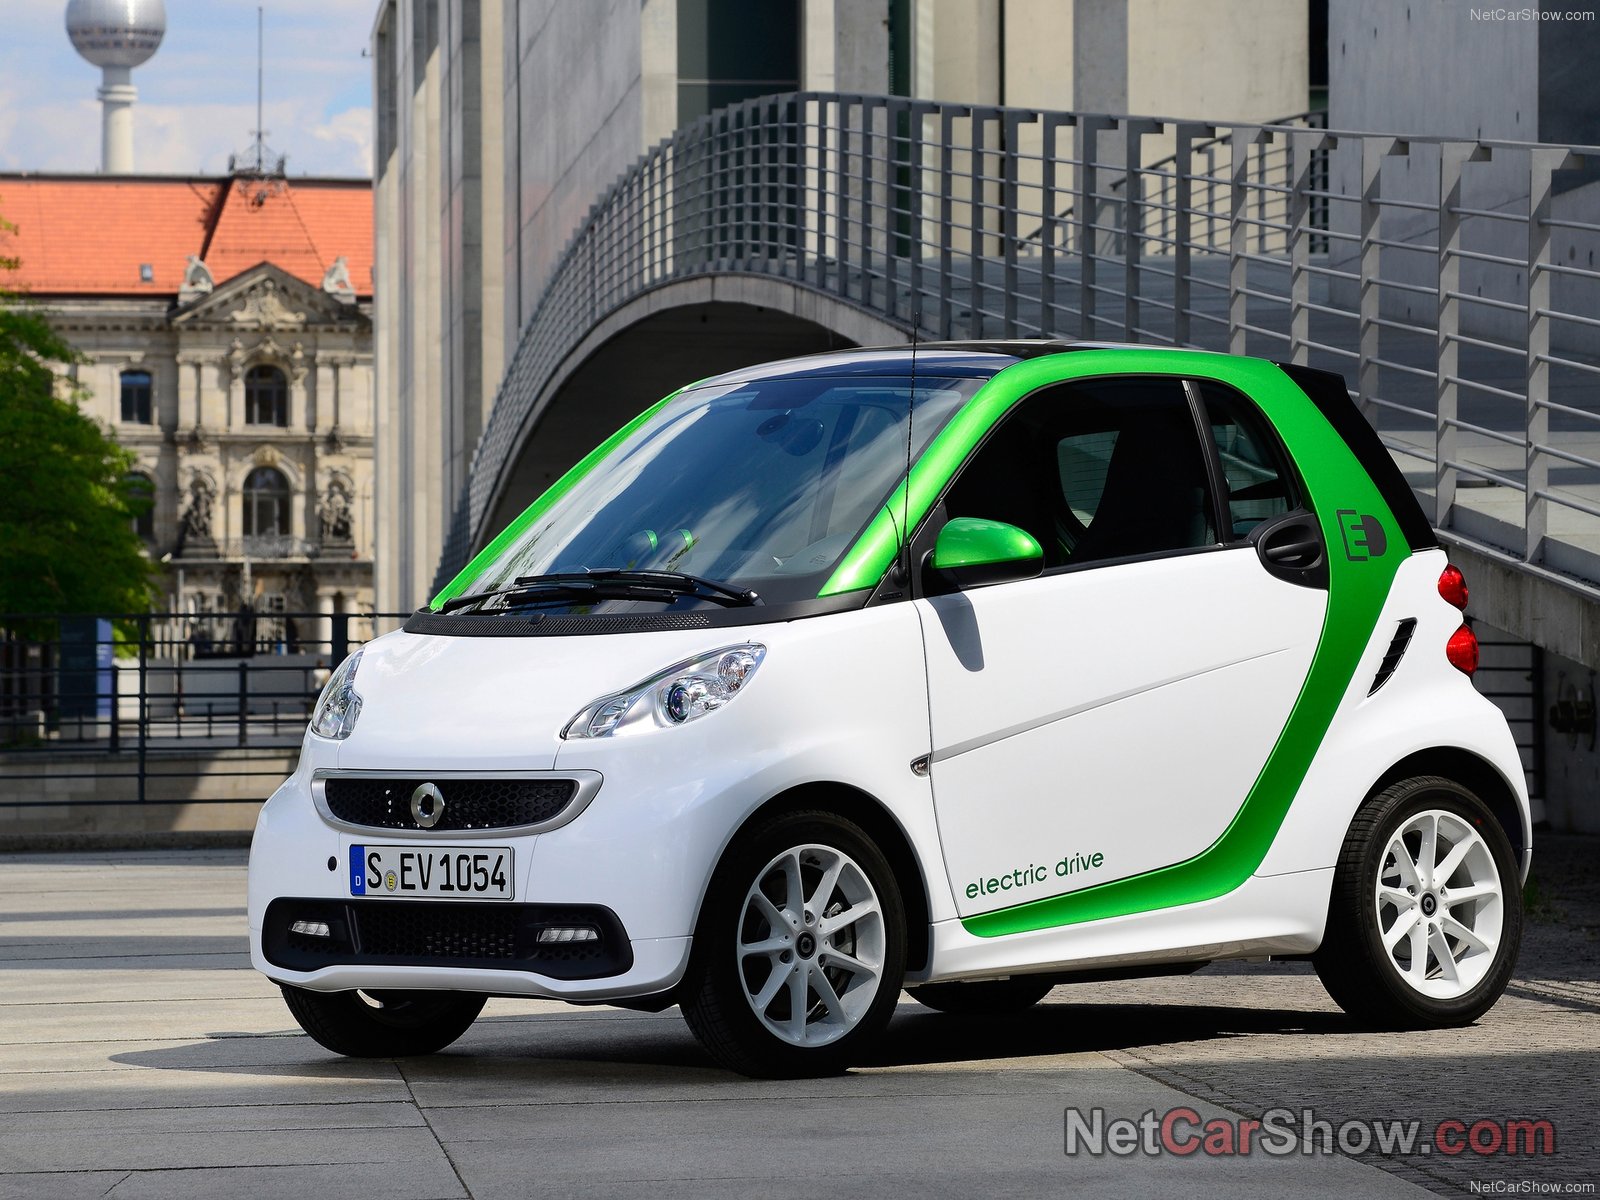 Электромашина ли. Smart Fortwo Electric Drive, 2015. Smart Fortwo электро. Мерседес микро смарт. Used 2015 Smart Fortwo Electric.